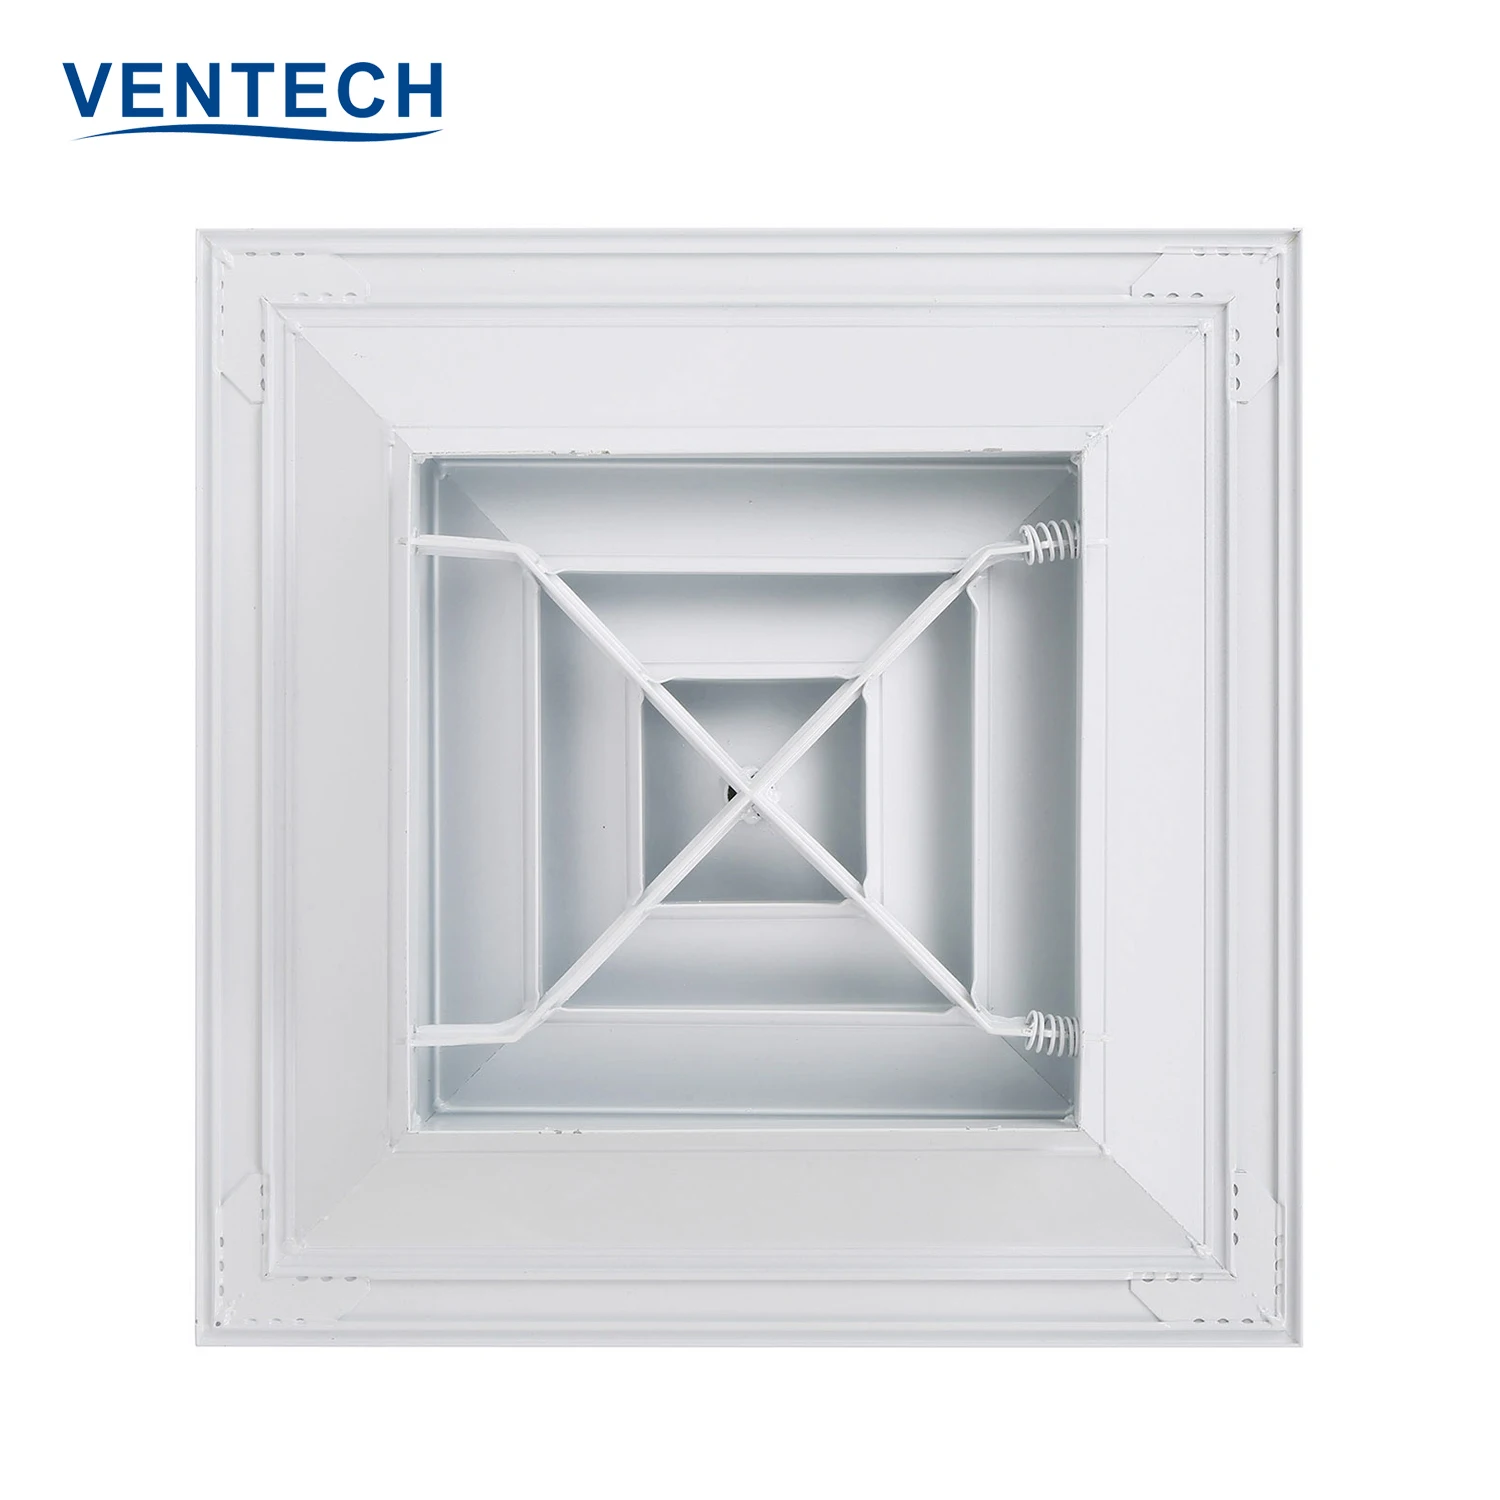 Hvac air duct work ceiling vent back X structure 4 way square air diffuser